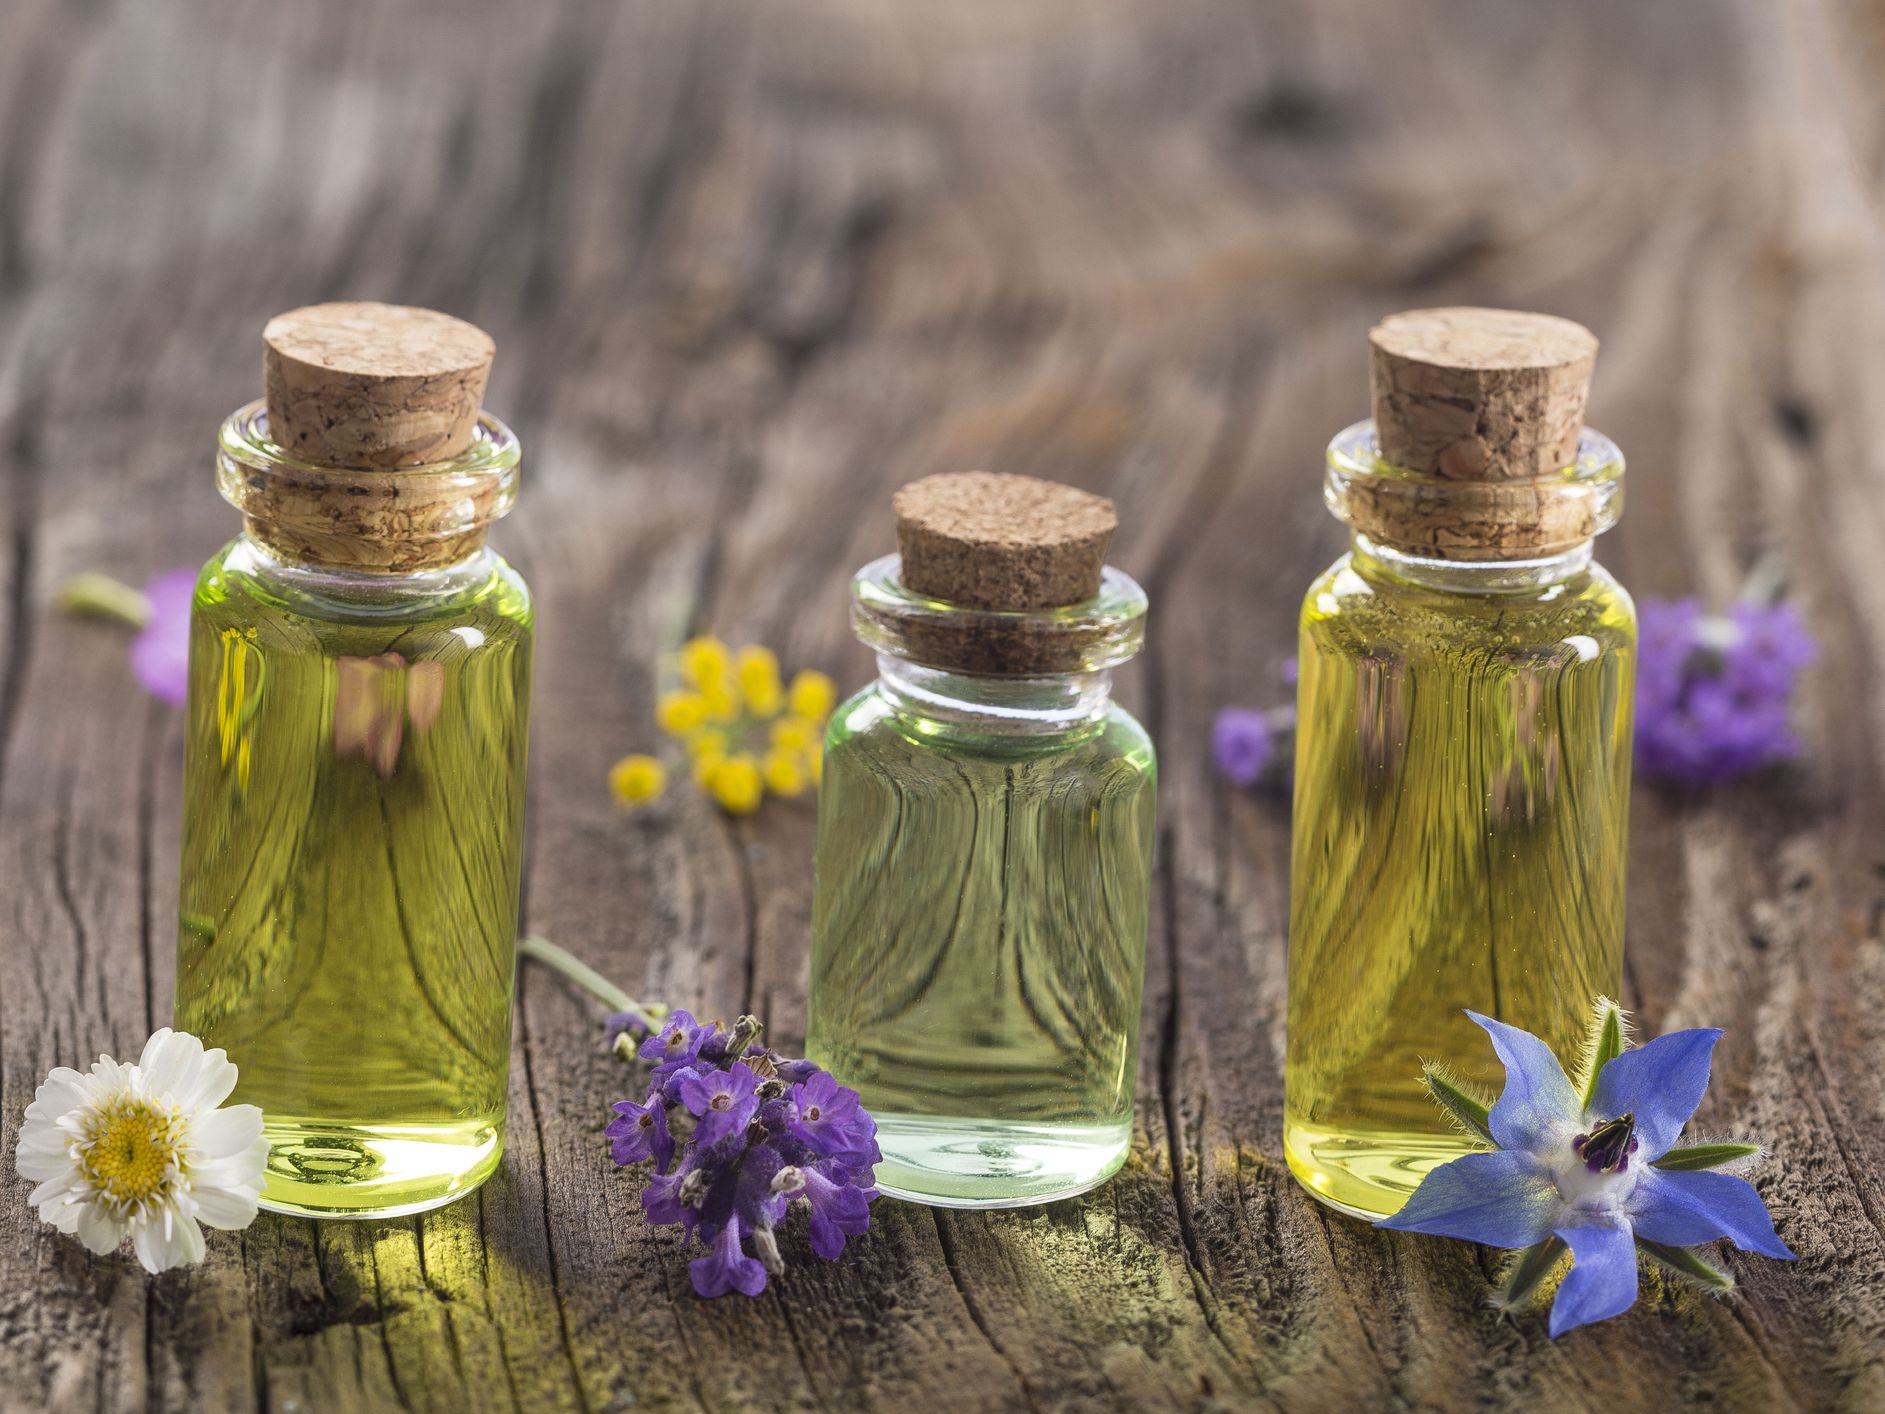 How to Use Aromatherapy to Help Ease Anxiety